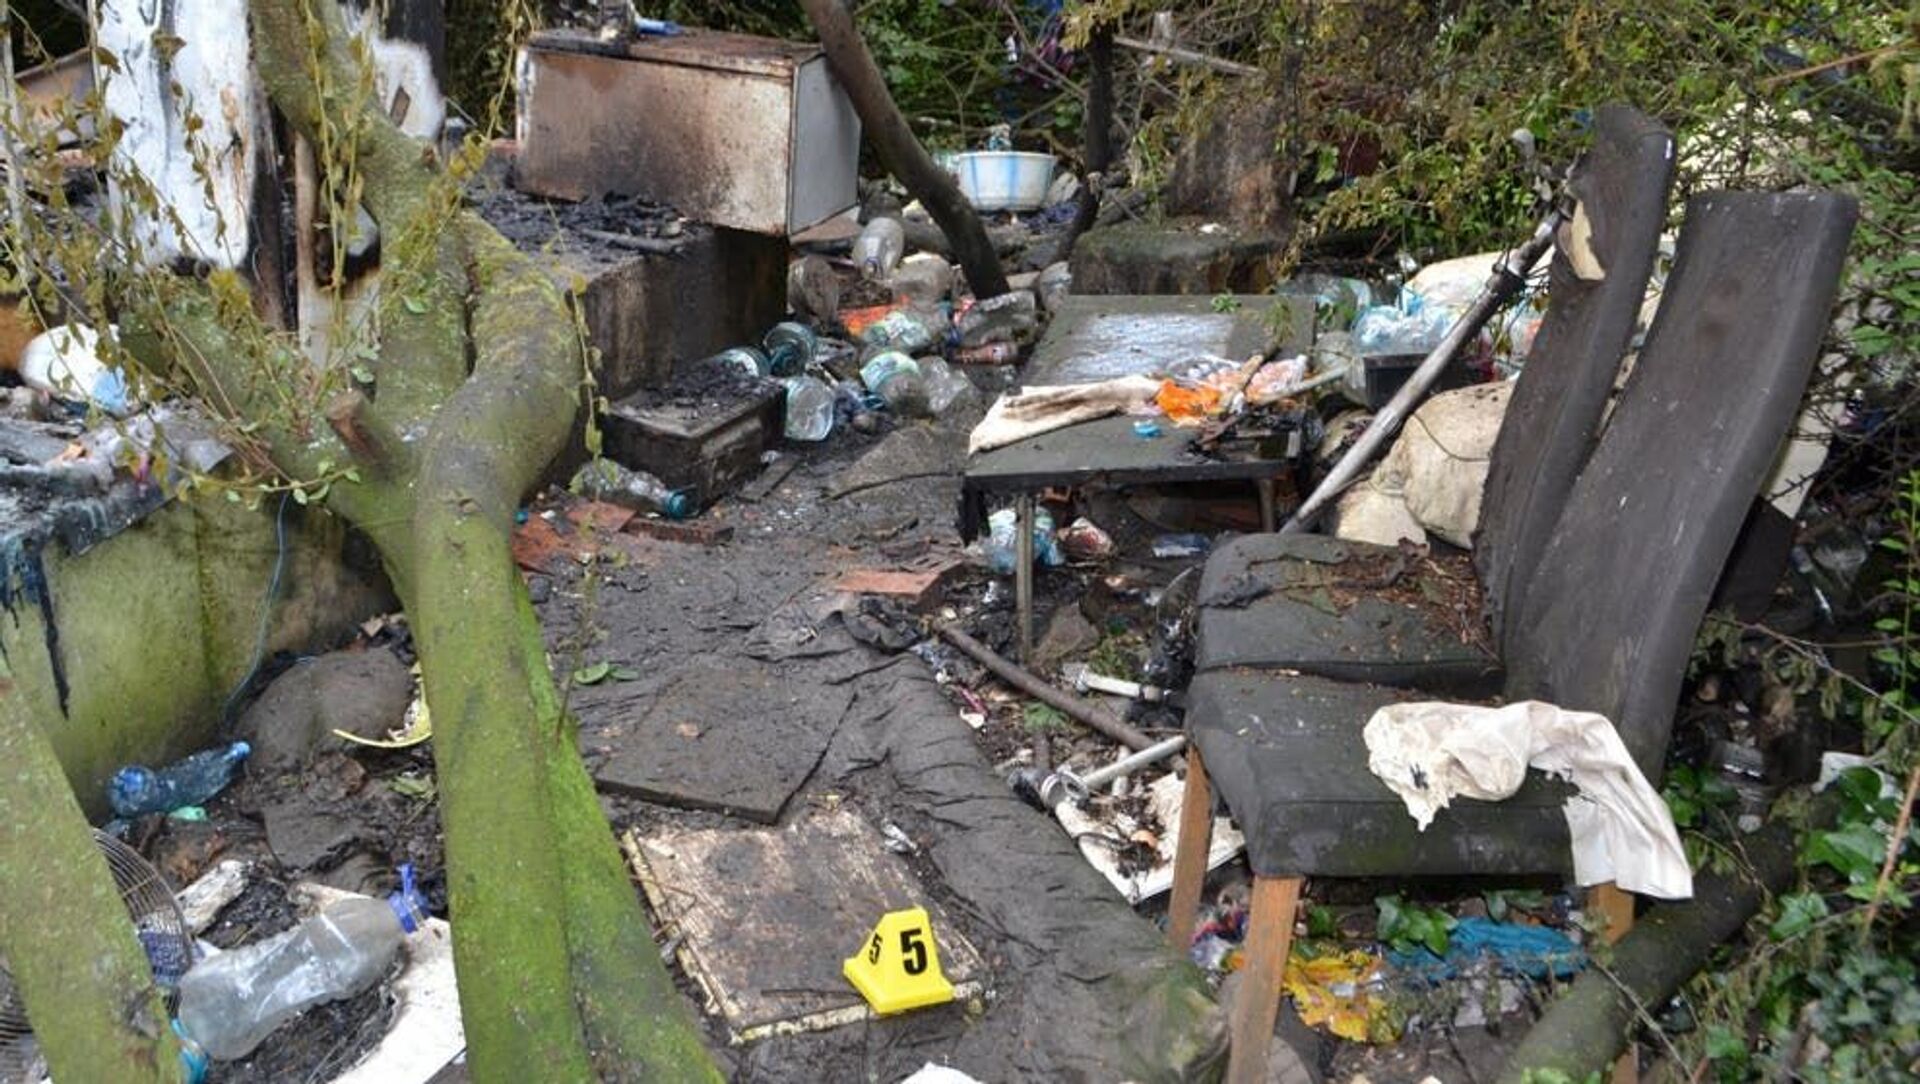 The remains of a hut in Ilford, east London which was set on fire killing Ionut Manea in June 2019 - Sputnik International, 1920, 23.03.2021